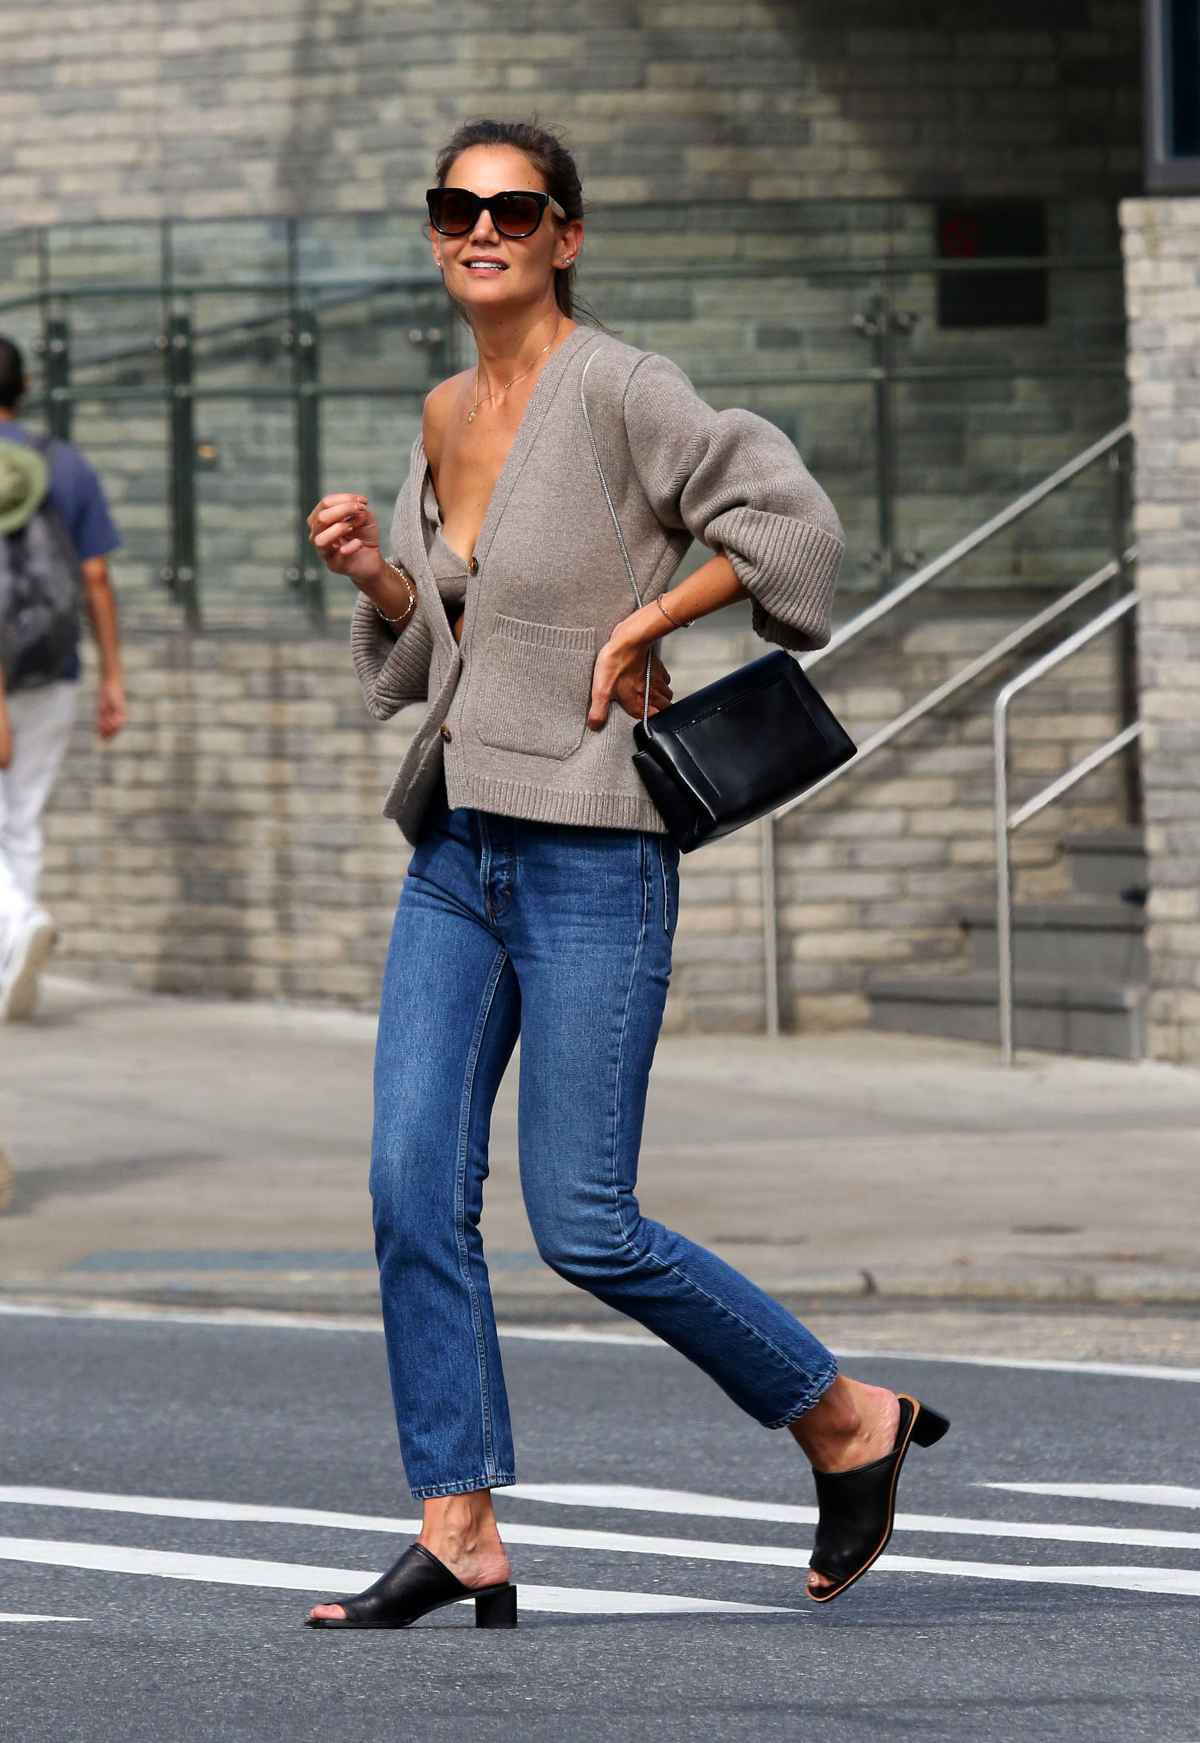 6 Birkenstock Outfits Inspired by the Likes of Katie Holmes